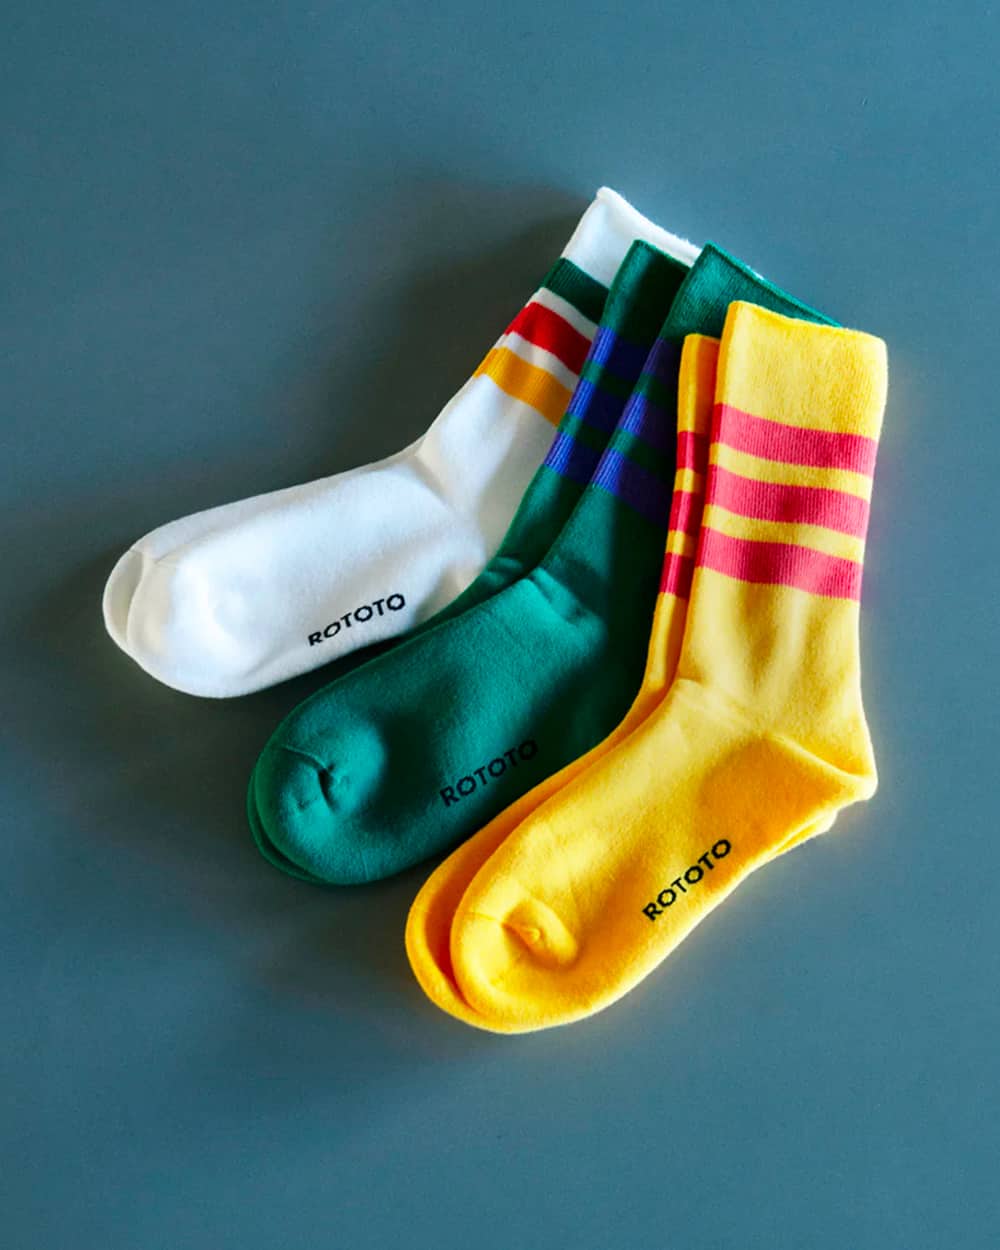 Three pairs of men's RoToTo striped socks in yellow, green and white